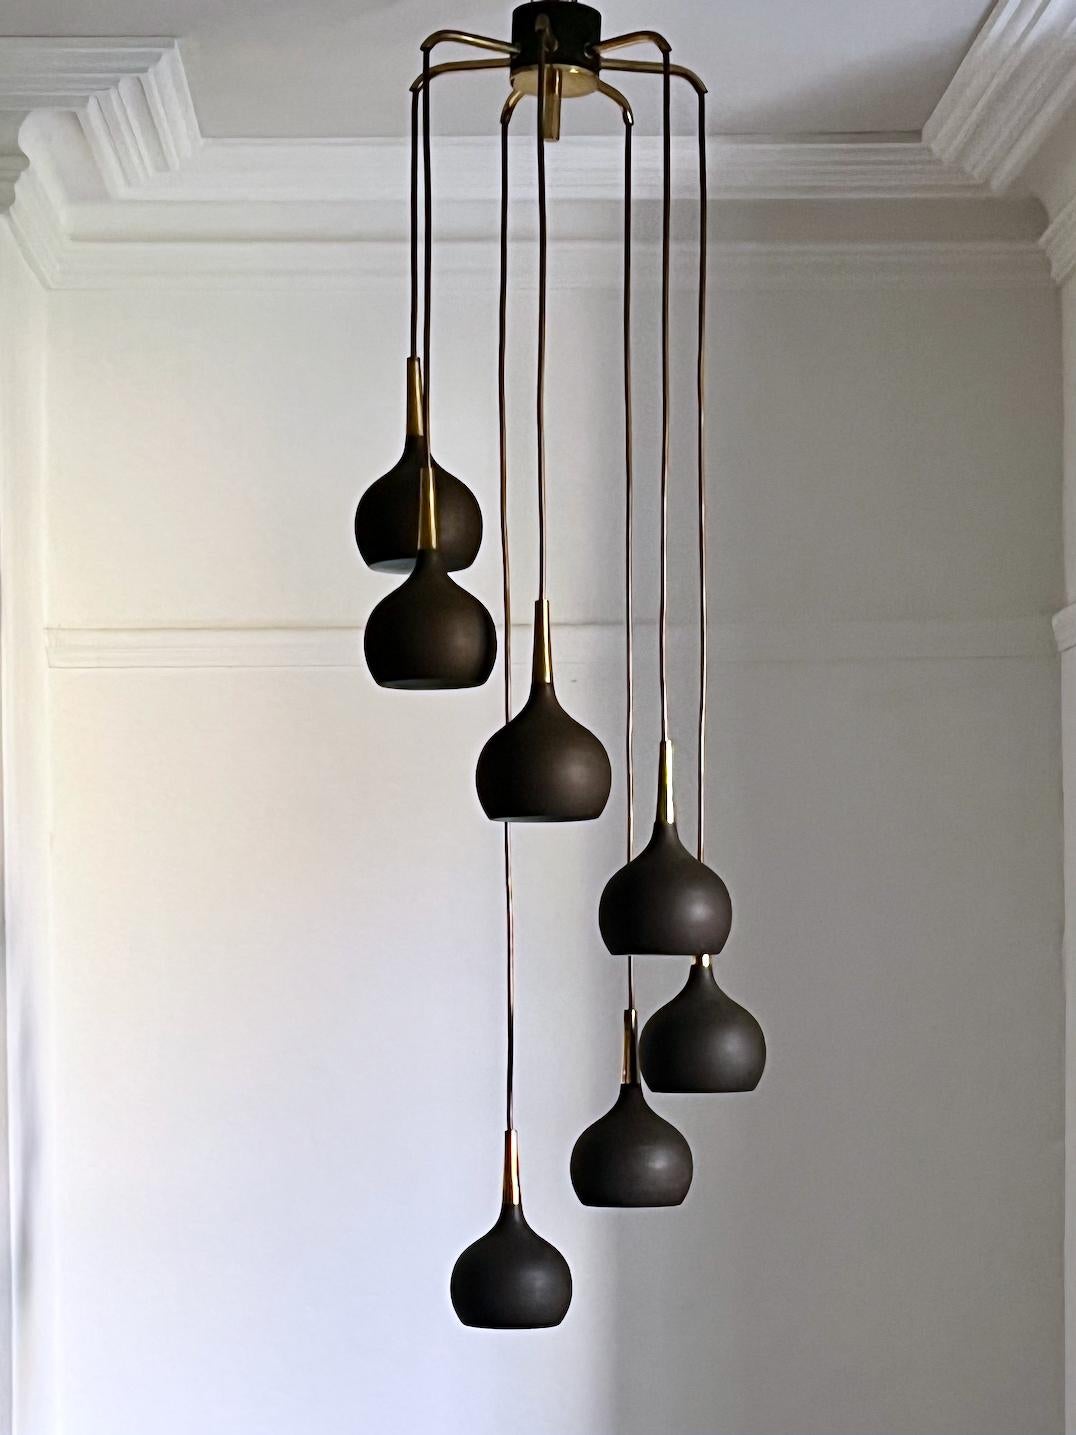 A beautiful midcentury Cascade chandelier by Swedish designer Hans Agne Jakobsson.

The chandelier comprises seven metal shades with charcol-brown finish and brass cones, all hanging from a seven-way brass ceiling canopy. Nicely made with an